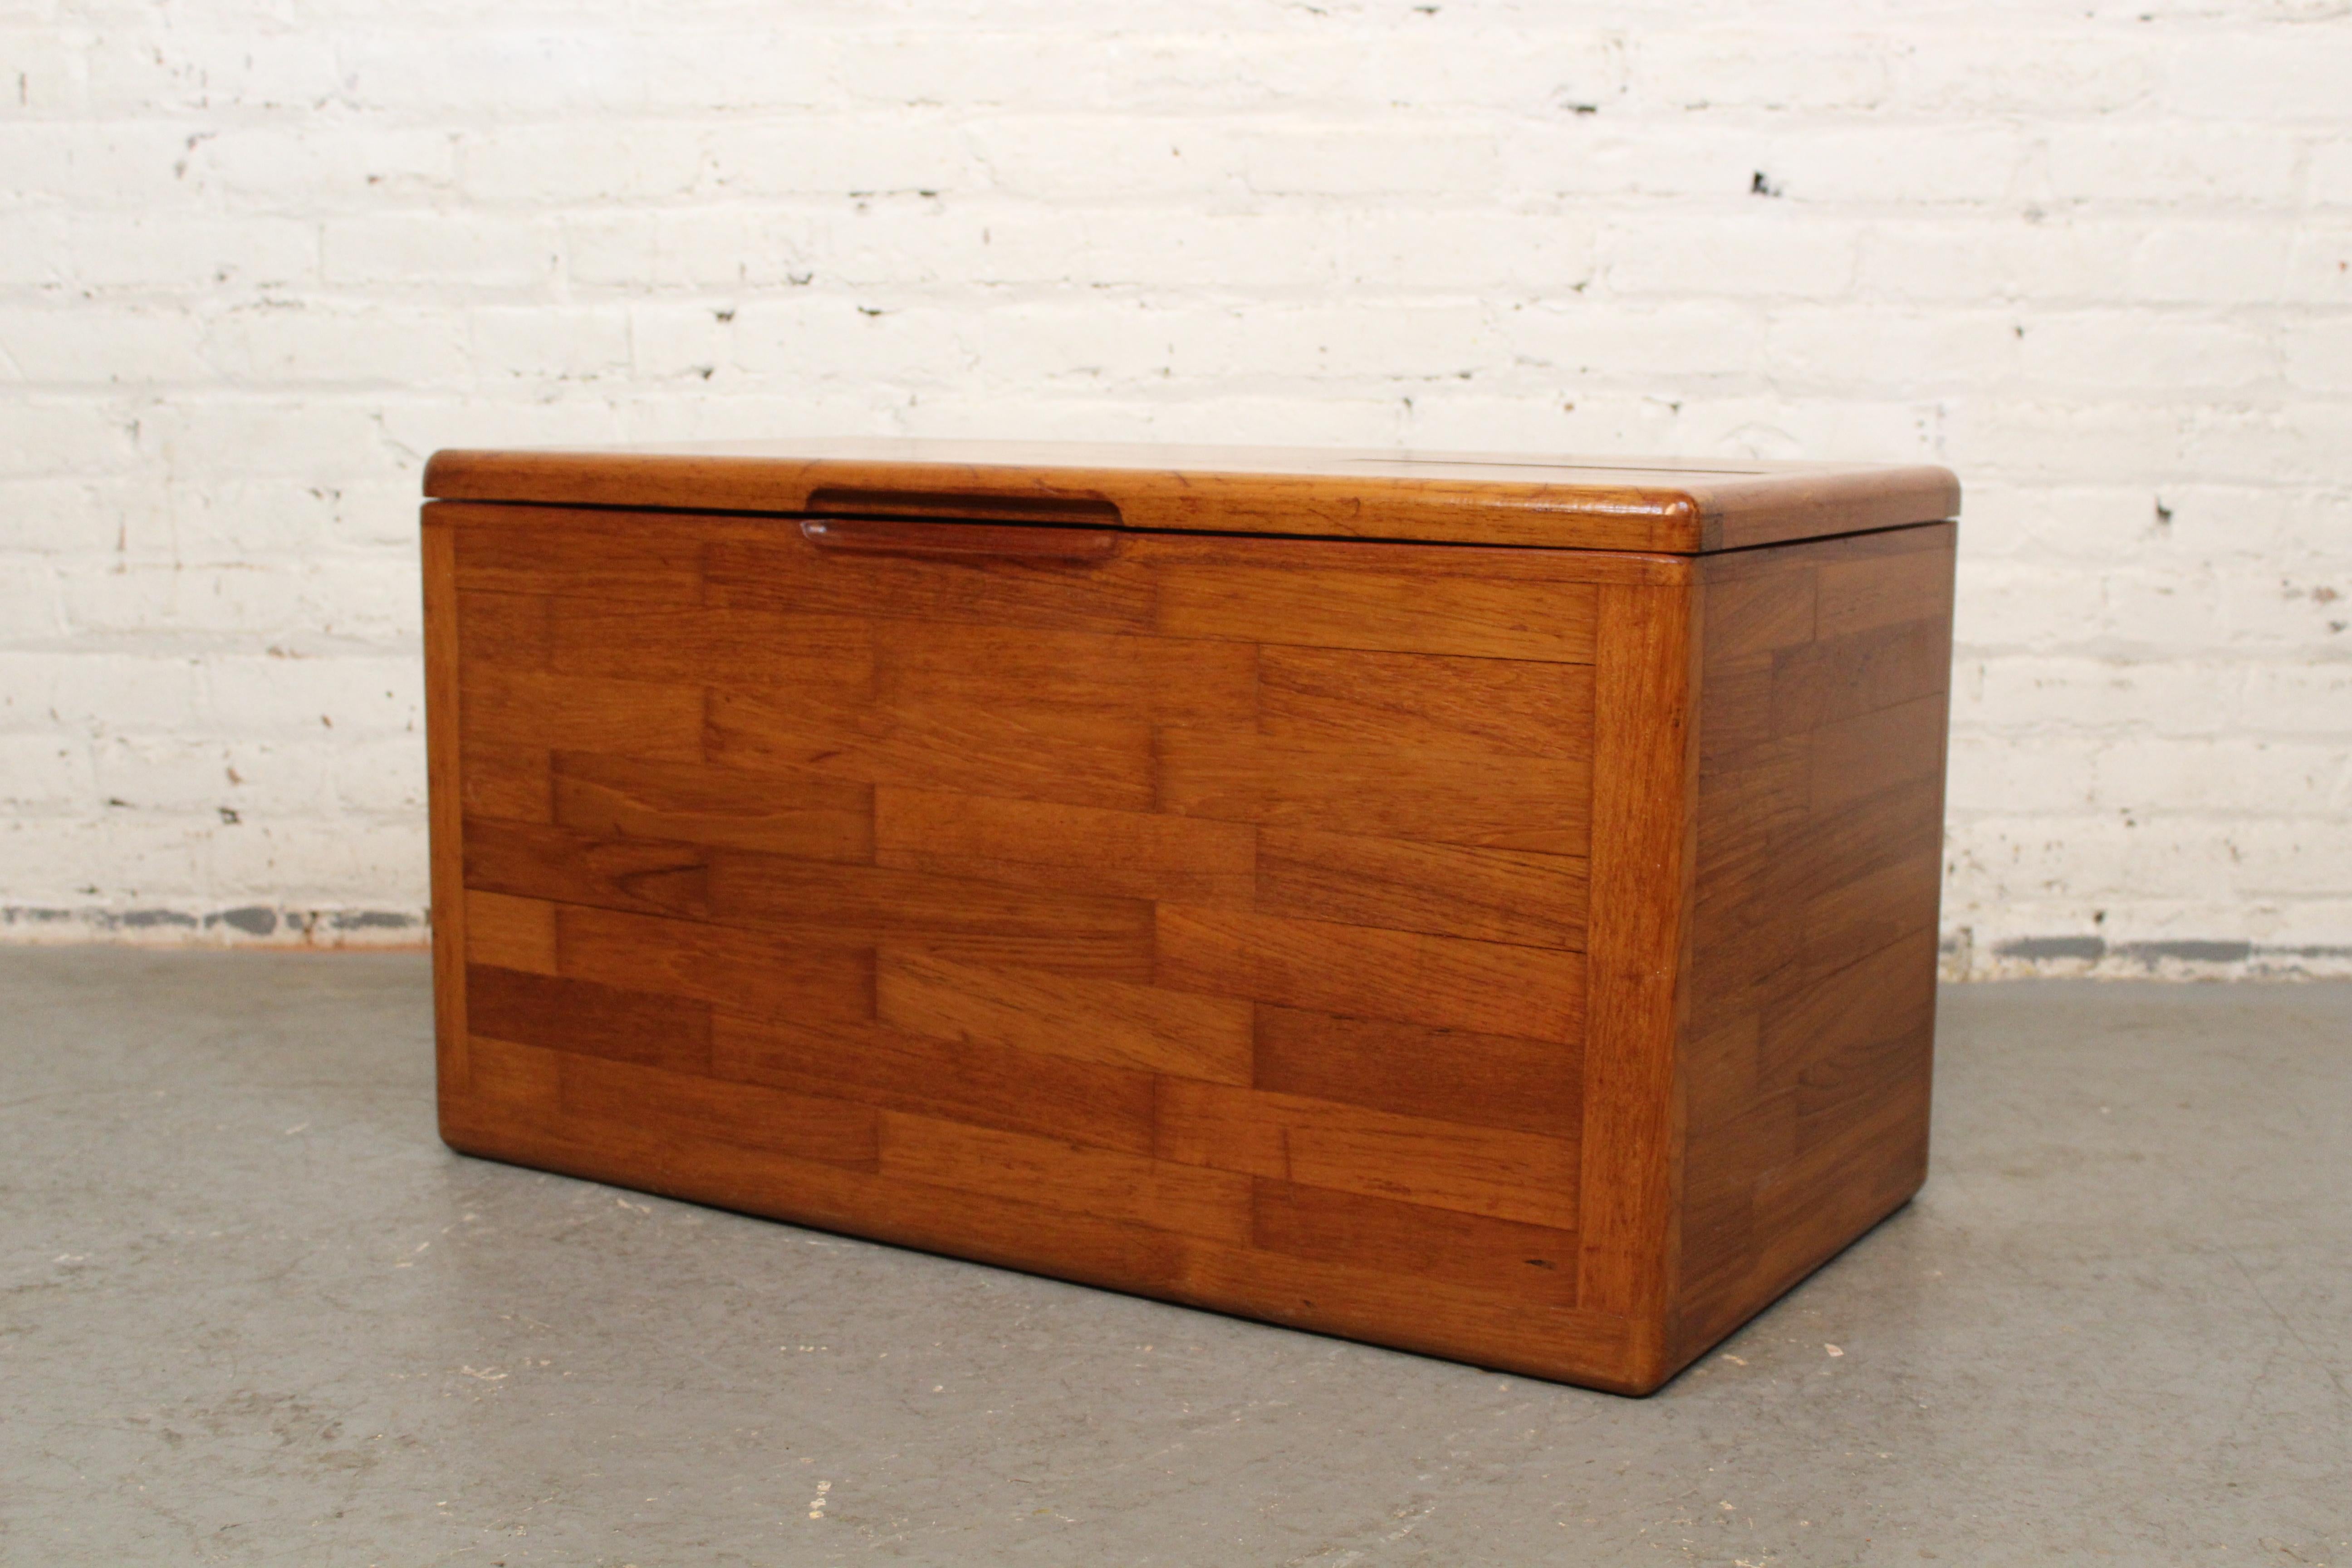 Add vintage charm to any room with this cheerful mid-century hope chest featuring a beautiful butcher block construction. Made entirely of solid wood (appearing to be a mix of maple, oak, and teak) with pegged joinery- the patchwork of natural wood